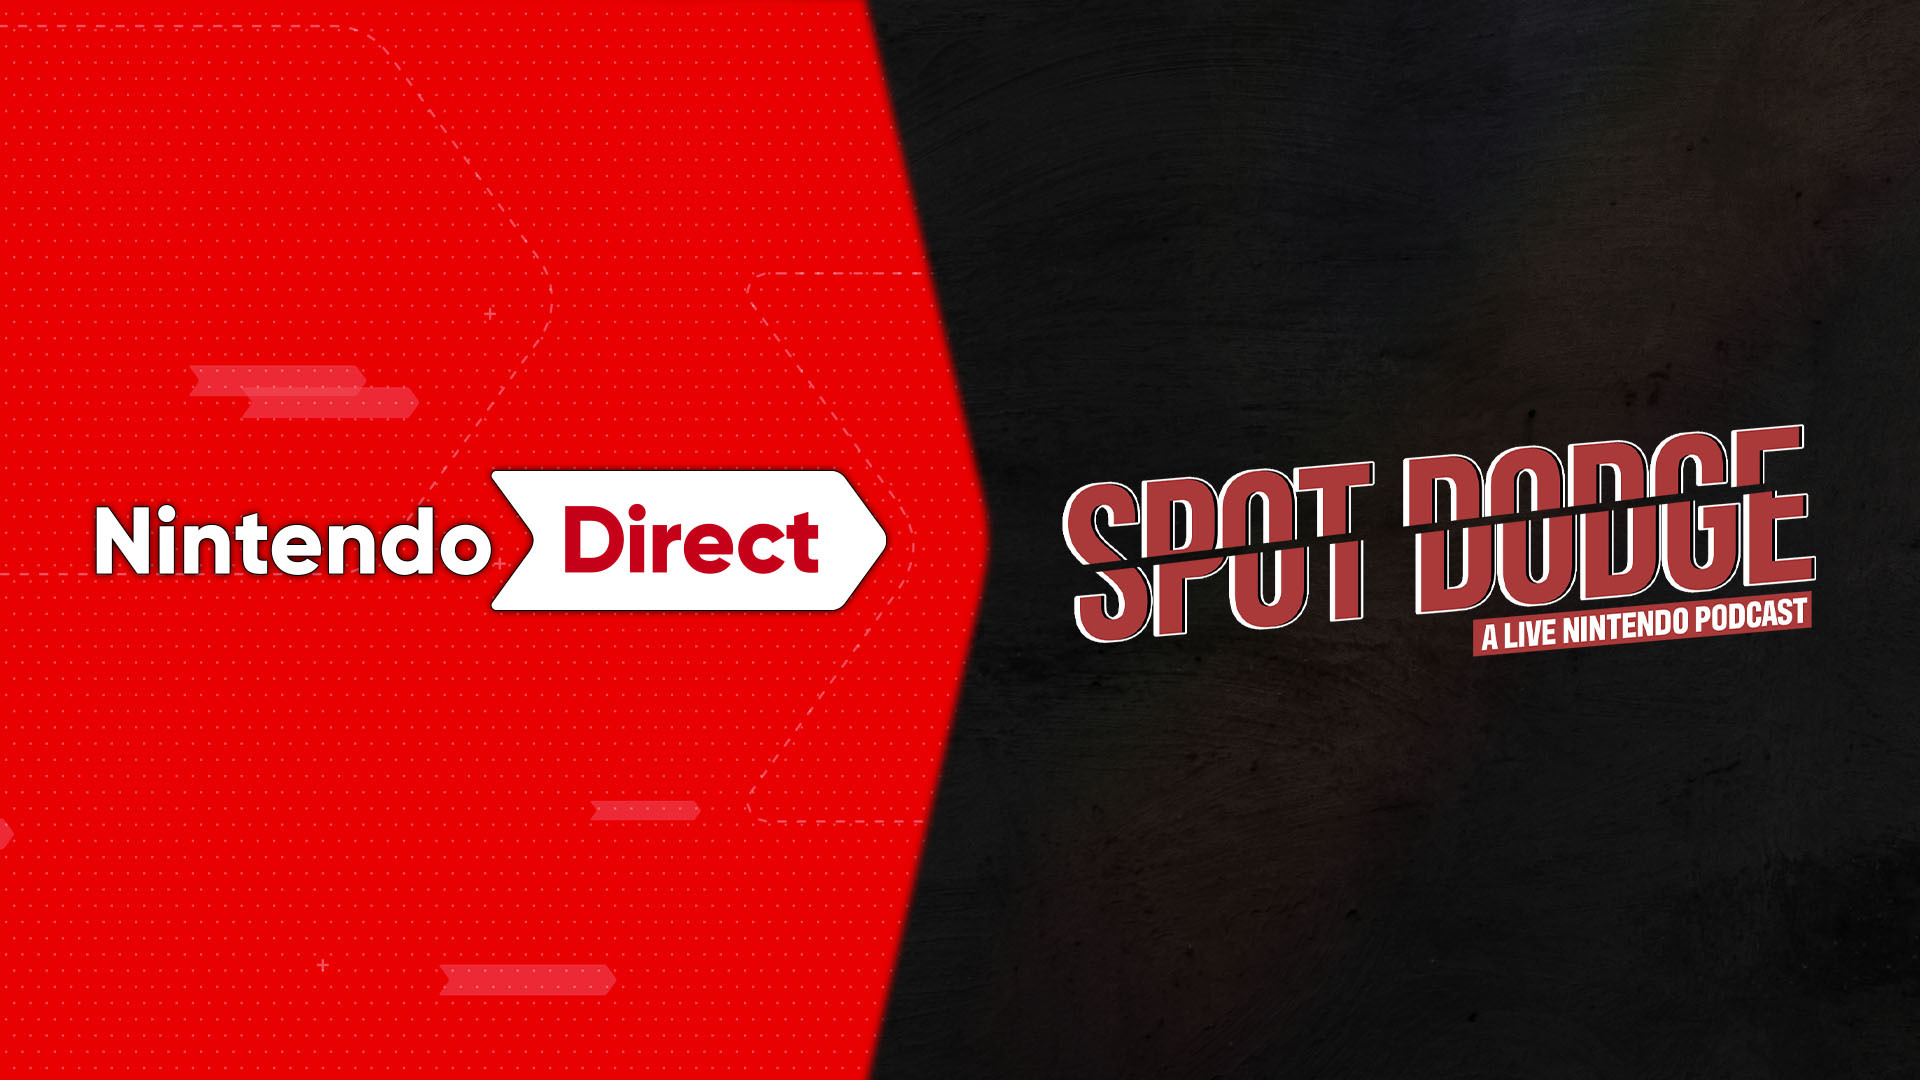 Nintendo Direct aftershow live roundtable discussion